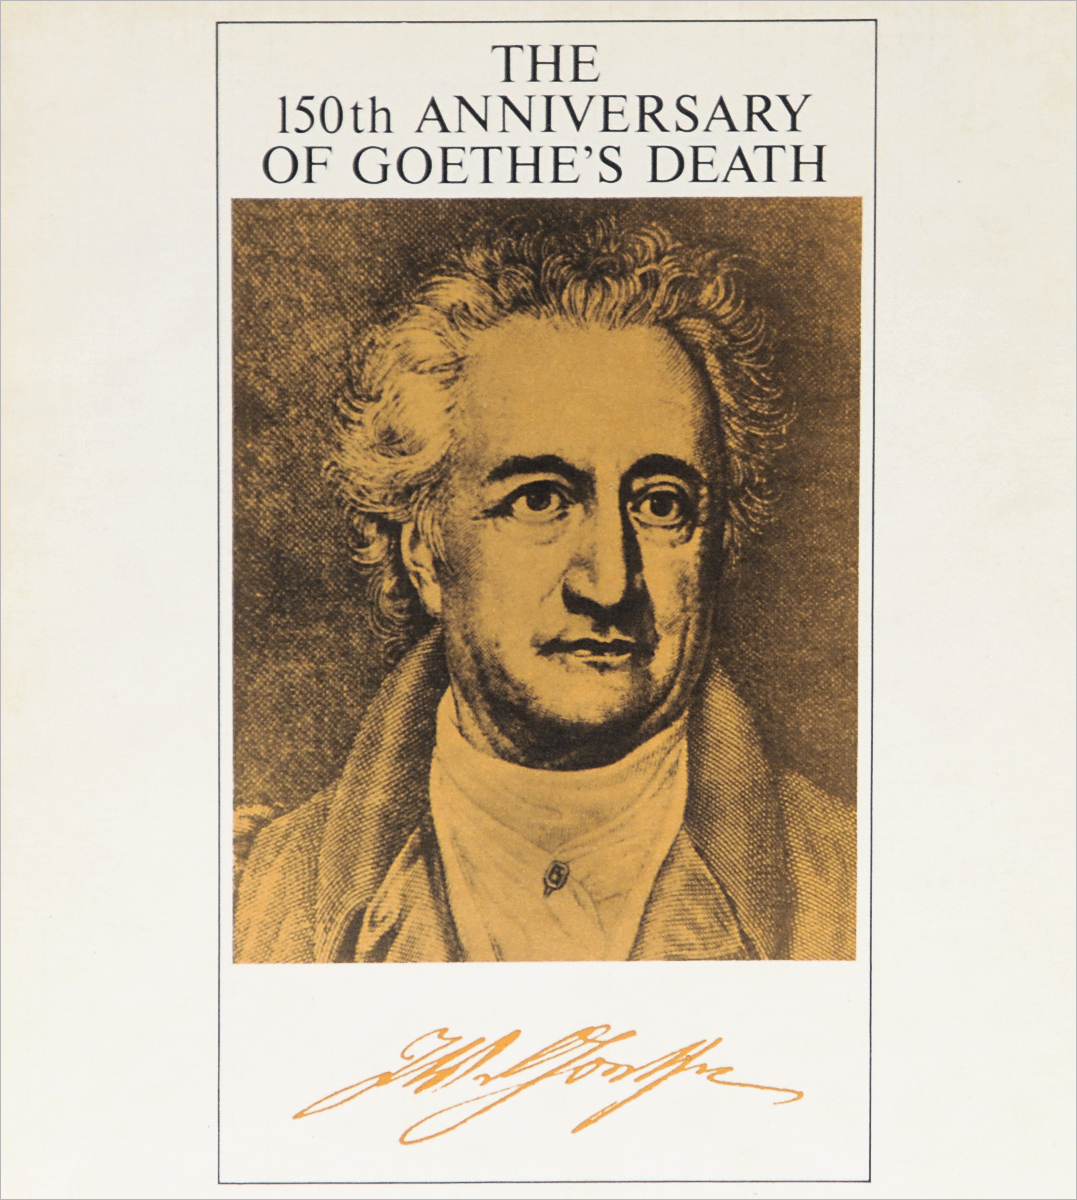 The 150th Anniversary of Goethe's Death